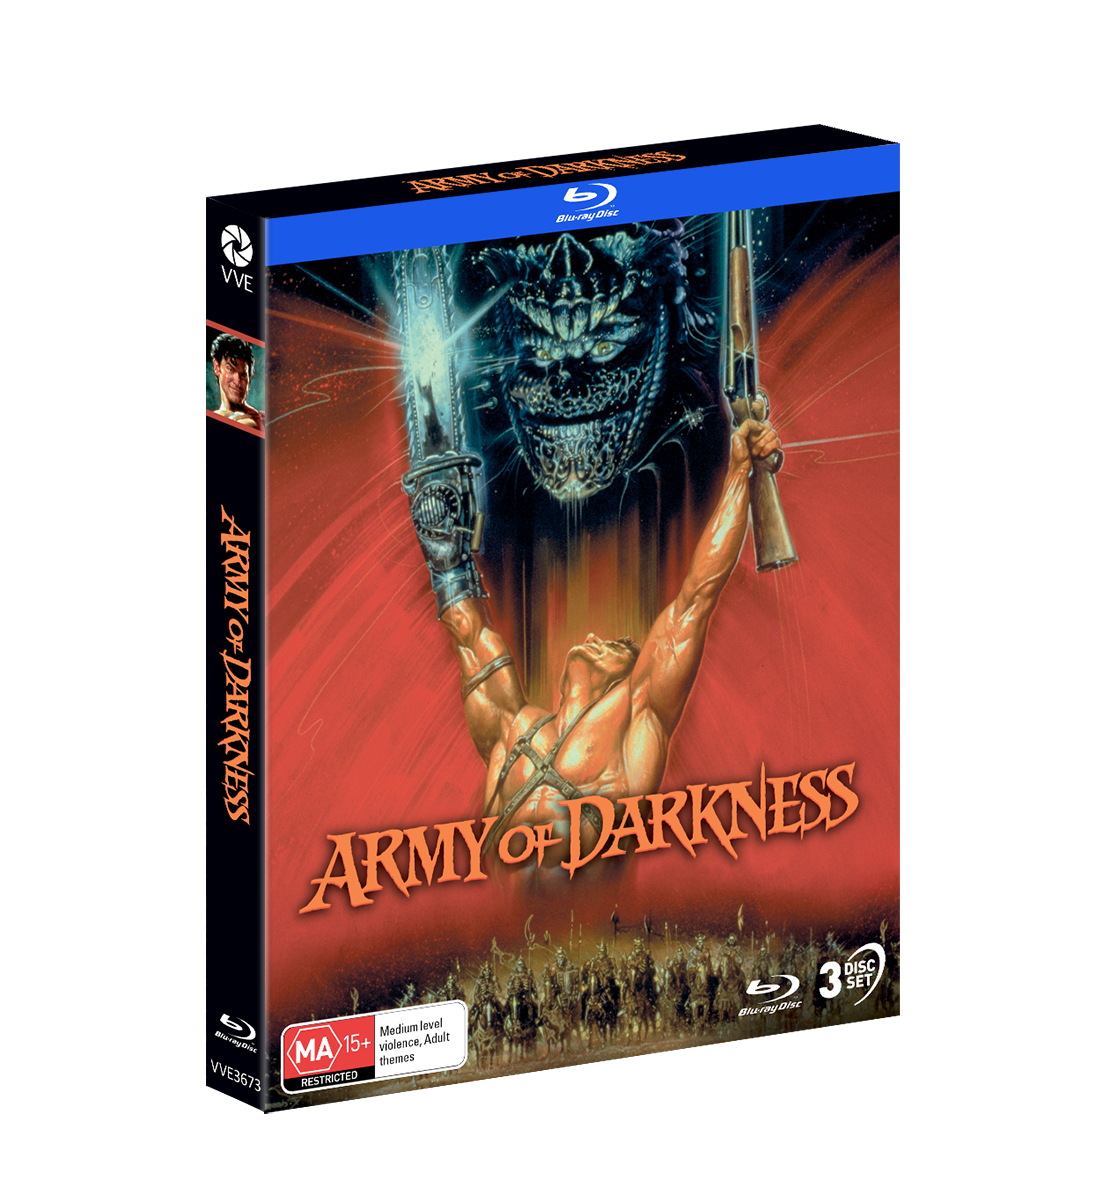 Army of Darkness (Special Edition) Blu-Ray